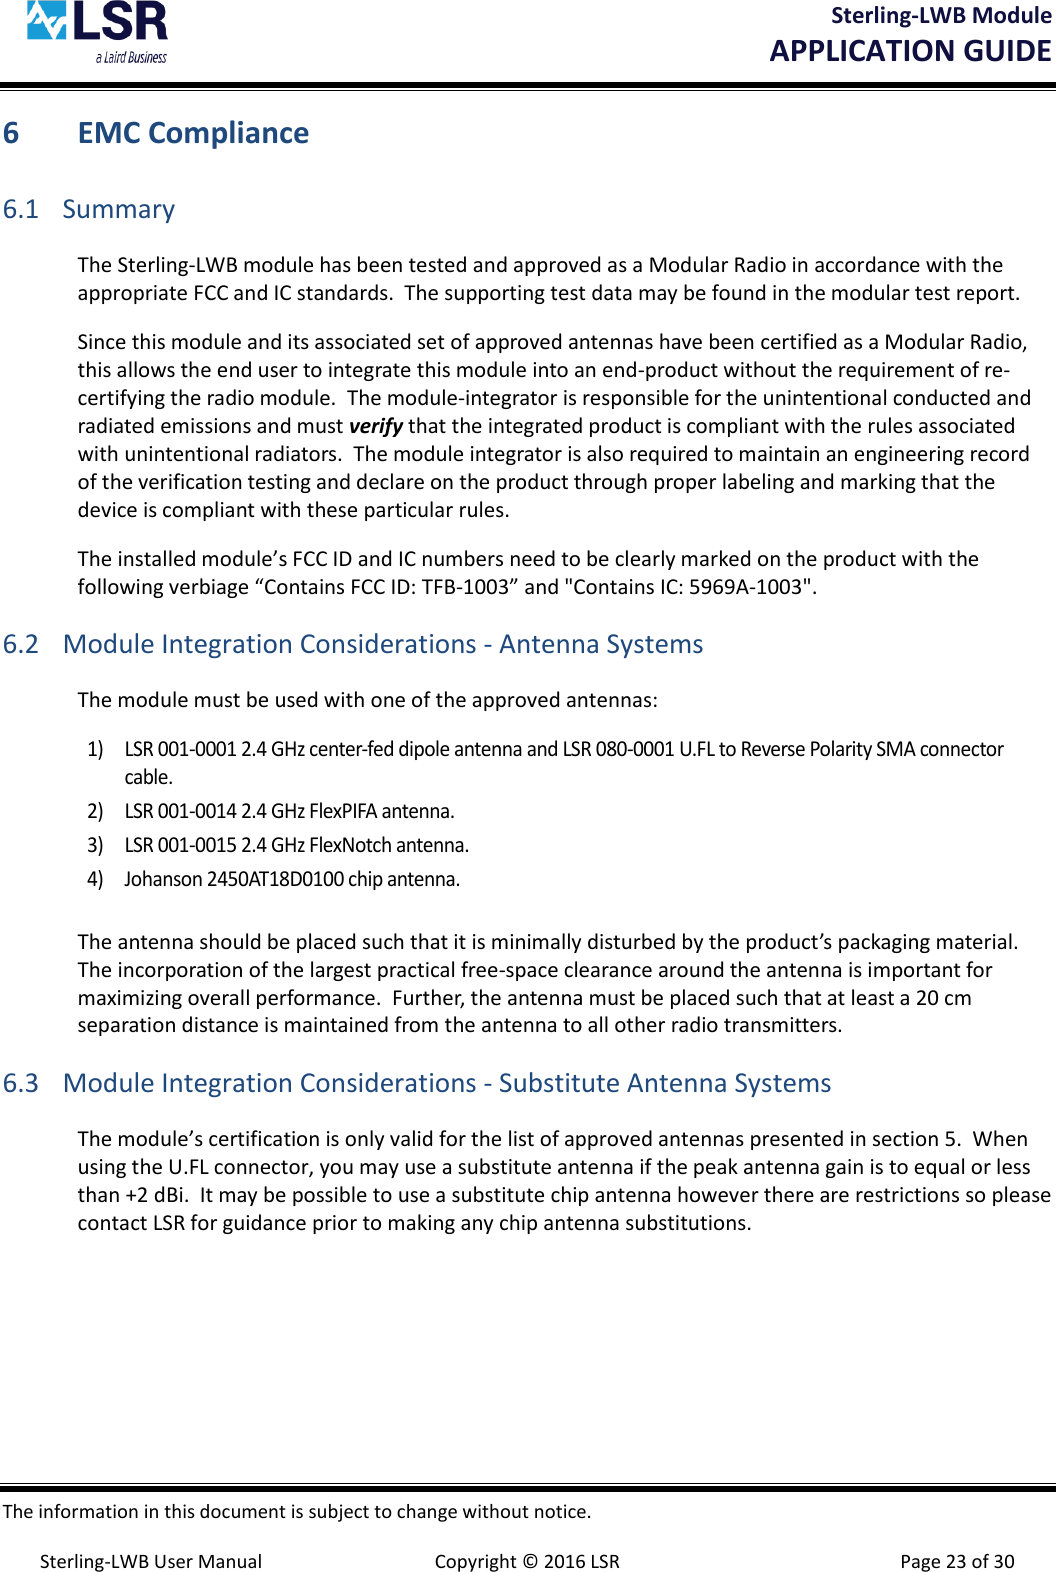 Sterling-LWB Module       APPLICATION GUIDE  The information in this document is subject to change without notice.  Sterling-LWB User Manual  Copyright © 2016 LSR  Page 23 of 30 6 EMC Compliance 6.1 Summary The Sterling-LWB module has been tested and approved as a Modular Radio in accordance with the appropriate FCC and IC standards.  The supporting test data may be found in the modular test report. Since this module and its associated set of approved antennas have been certified as a Modular Radio, this allows the end user to integrate this module into an end-product without the requirement of re-certifying the radio module.  The module-integrator is responsible for the unintentional conducted and radiated emissions and must verify that the integrated product is compliant with the rules associated with unintentional radiators.  The module integrator is also required to maintain an engineering record of the verification testing and declare on the product through proper labeling and marking that the device is compliant with these particular rules.   The installed module’s FCC ID and IC numbers need to be clearly marked on the product with the following verbiage “Contains FCC ID: TFB-1003” and &quot;Contains IC: 5969A-1003&quot;. 6.2 Module Integration Considerations - Antenna Systems The module must be used with one of the approved antennas:  1) LSR 001-0001 2.4 GHz center-fed dipole antenna and LSR 080-0001 U.FL to Reverse Polarity SMA connector cable. 2) LSR 001-0014 2.4 GHz FlexPIFA antenna. 3) LSR 001-0015 2.4 GHz FlexNotch antenna. 4) Johanson 2450AT18D0100 chip antenna.  The antenna should be placed such that it is minimally disturbed by the product’s packaging material.  The incorporation of the largest practical free-space clearance around the antenna is important for maximizing overall performance.  Further, the antenna must be placed such that at least a 20 cm separation distance is maintained from the antenna to all other radio transmitters.  6.3 Module Integration Considerations - Substitute Antenna Systems The module’s certification is only valid for the list of approved antennas presented in section 5.  When using the U.FL connector, you may use a substitute antenna if the peak antenna gain is to equal or less than +2 dBi.  It may be possible to use a substitute chip antenna however there are restrictions so please contact LSR for guidance prior to making any chip antenna substitutions.   